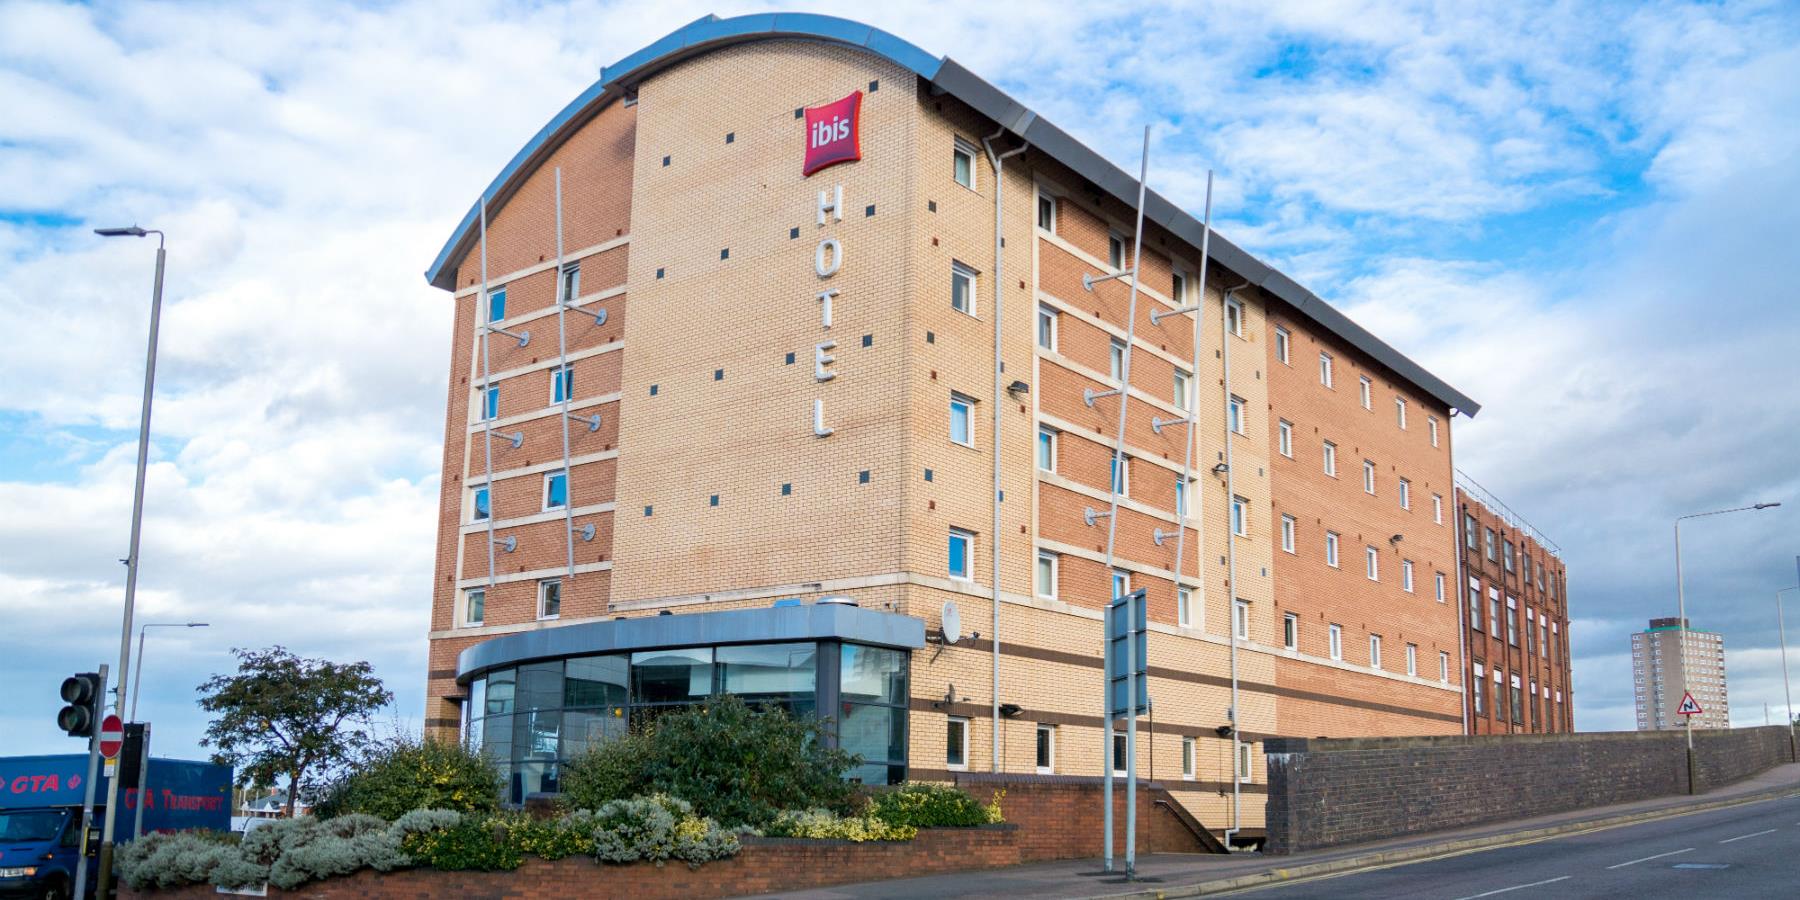 Hotel Ibis Leicester City Centre - Accommodation in Leicester